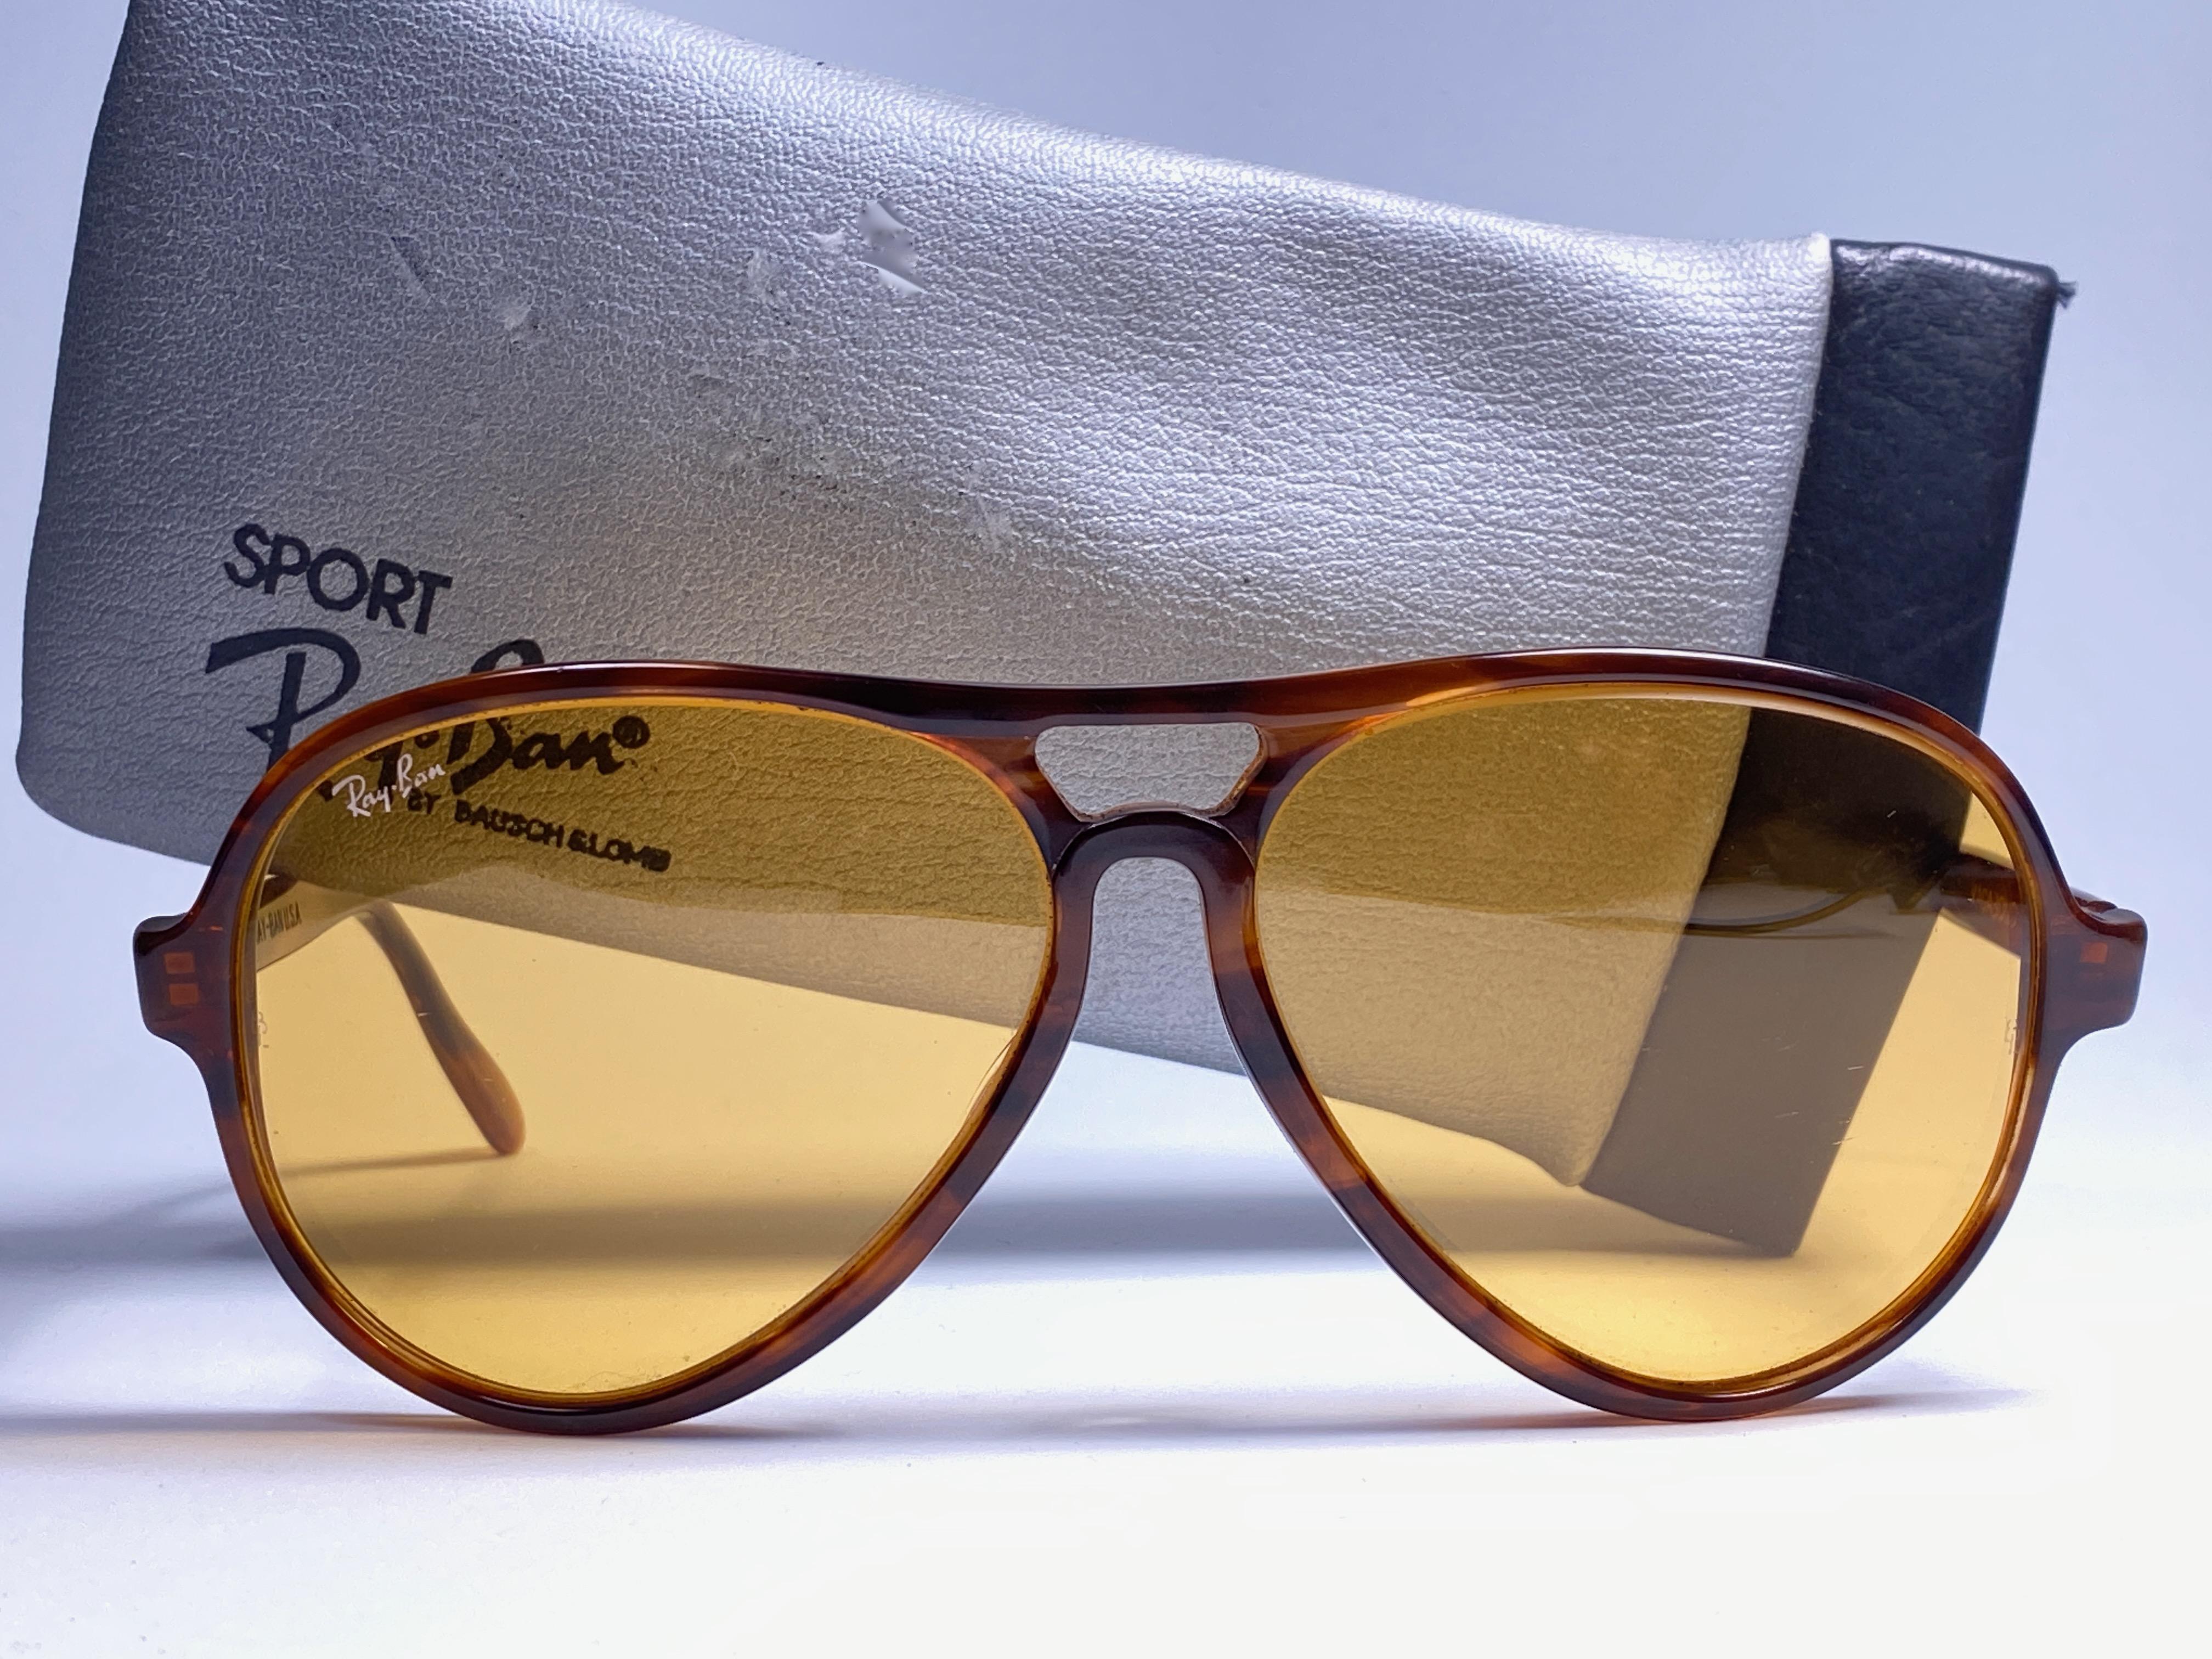 New and rare vintage Vagabond tortoise frame holding a spotless pair of Ambermatic lenses.  
New, never worn or displayed.  This pair may have minor sign of wear due to nearly 40 years of storage. Designed and Produced in USA.
